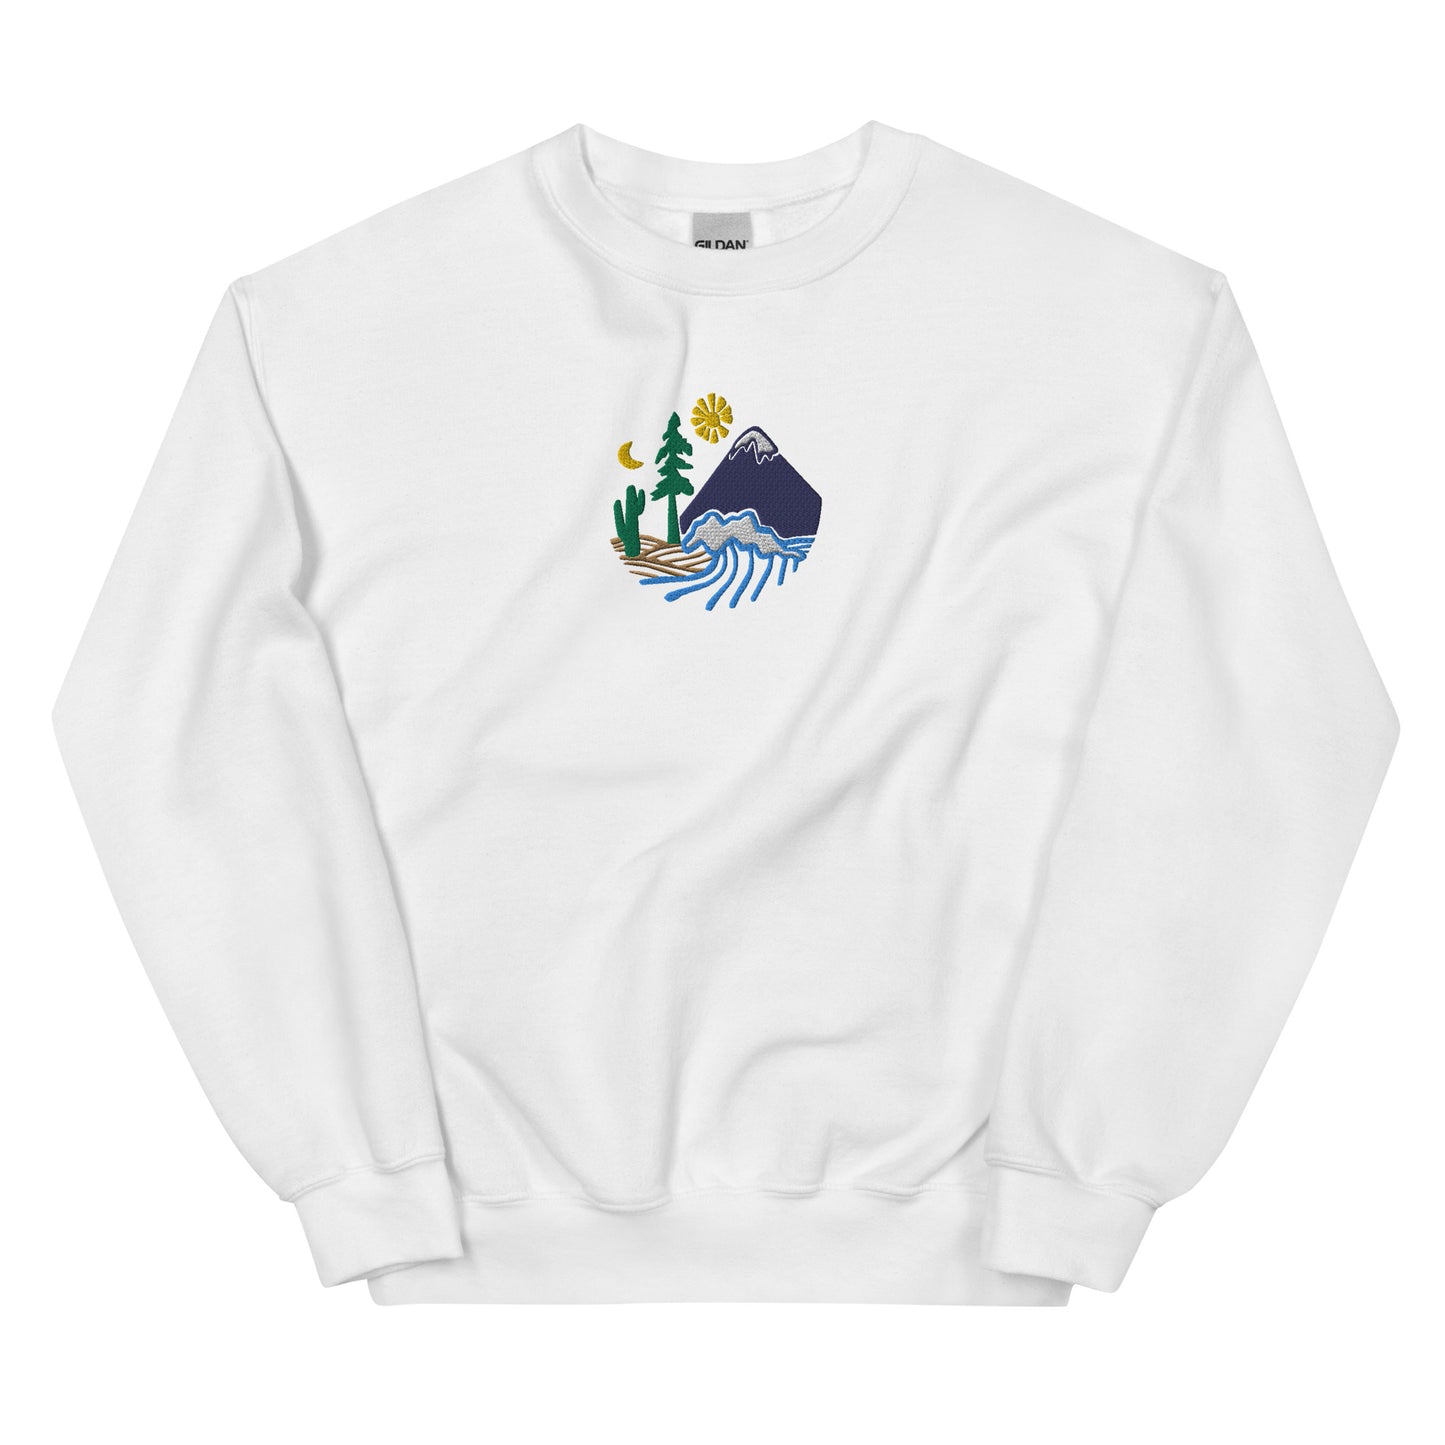 unearthed colored logo sweatshirt